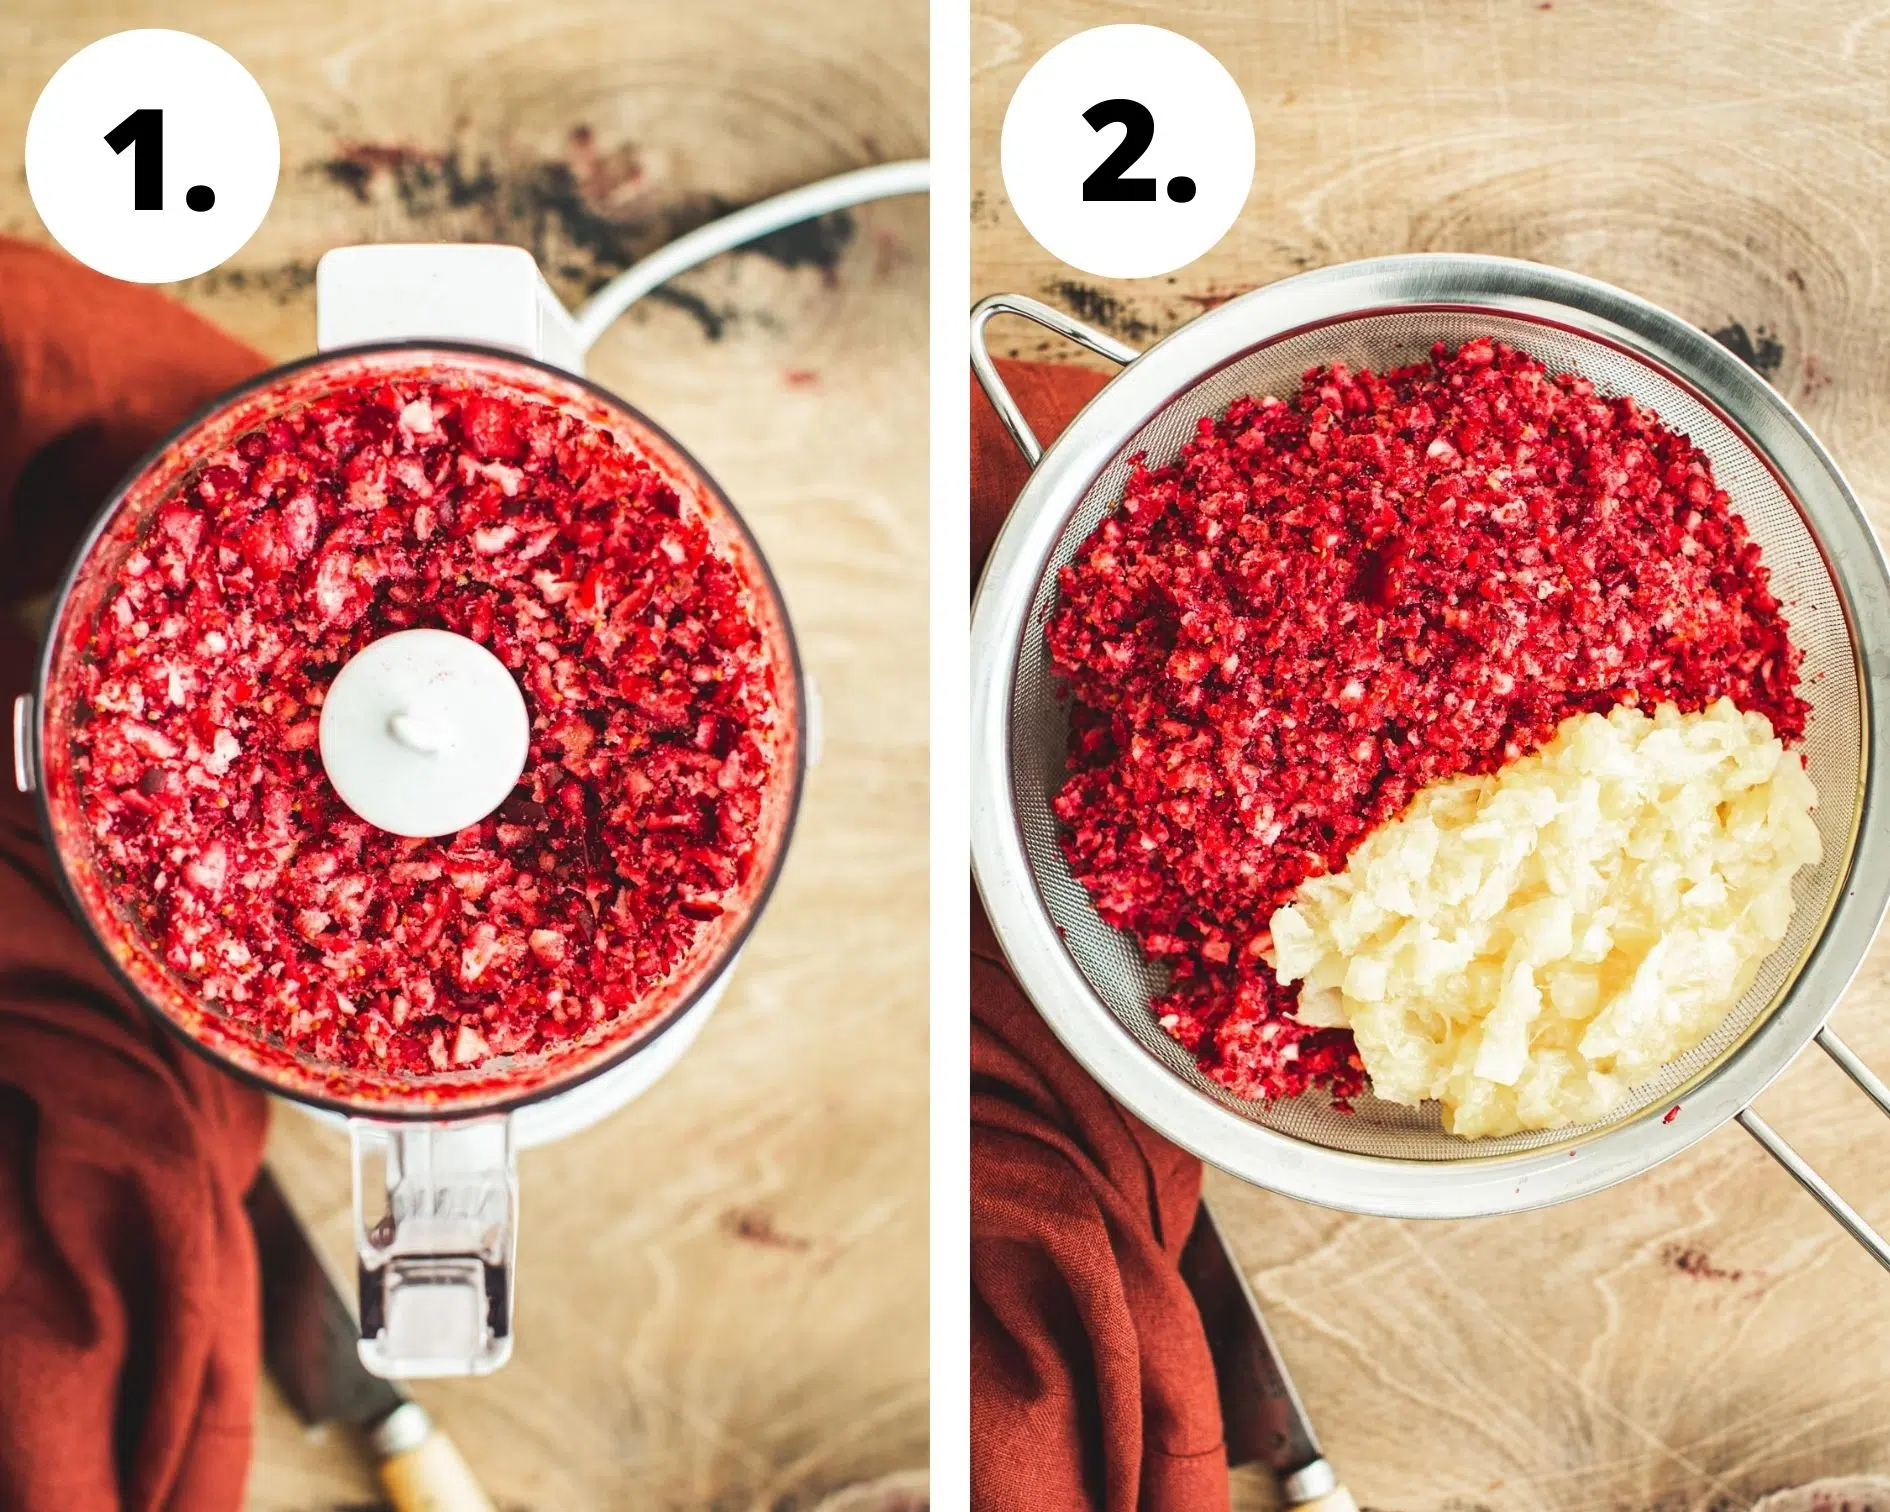 Cranberry fluff salad process steps 1 and 2.